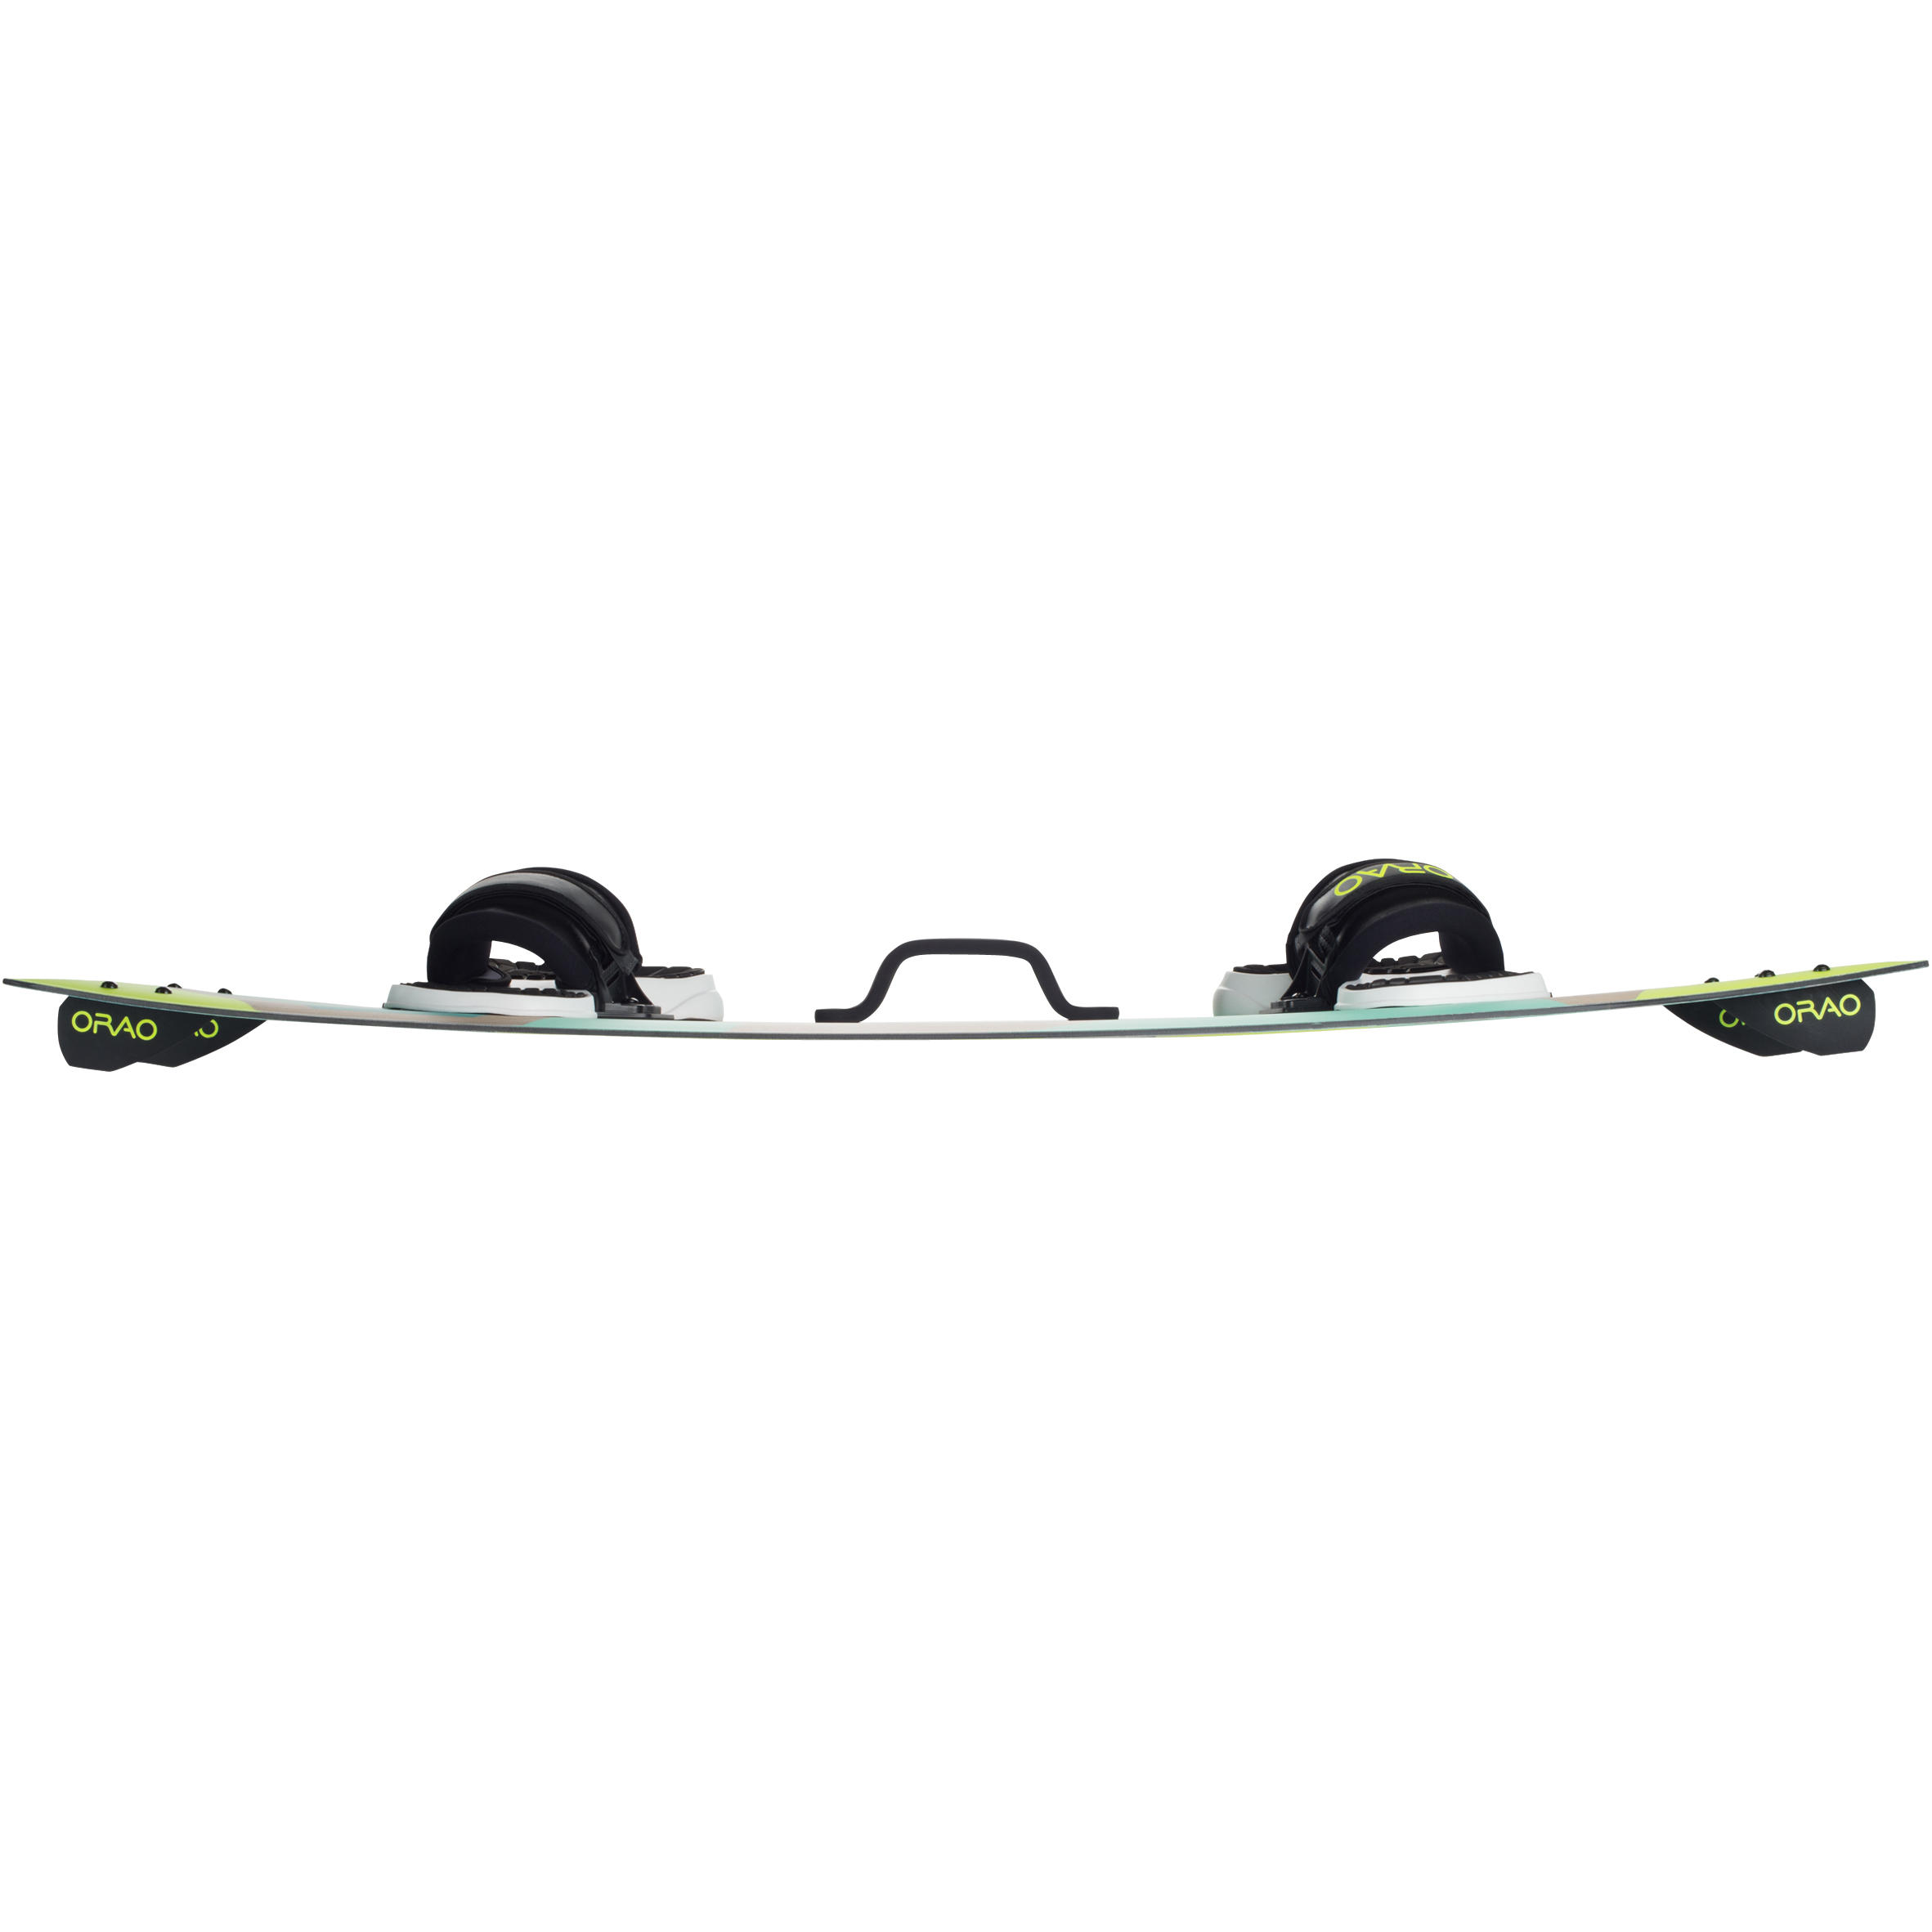 Twintip carbon kitesurf board 136 x 40.5 cm (pads and straps included) - TT500 3/30